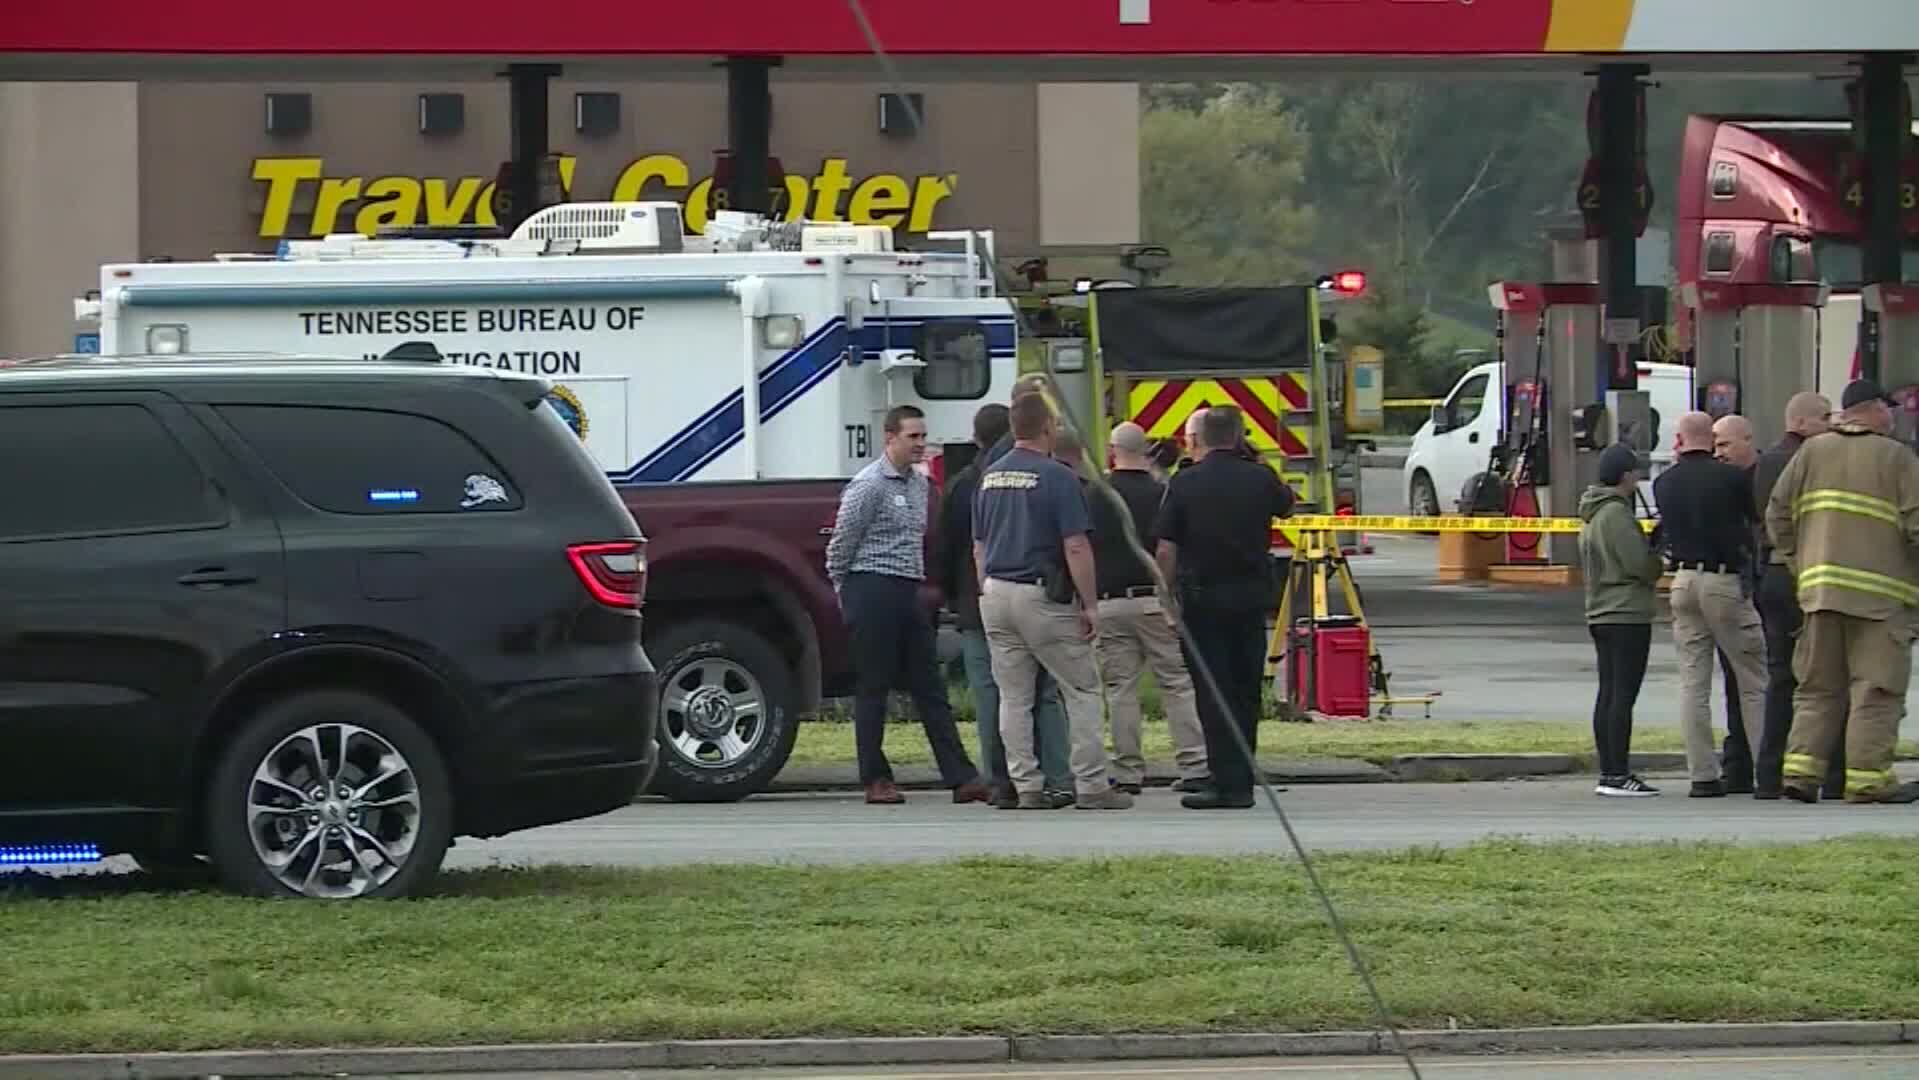 A truck driver stabbed four women, three of them fatally, at a Tennessee truck stop, the Tennessee Bureau of Investigation said. The truck driver was shot and killed by an officer at the scene. 